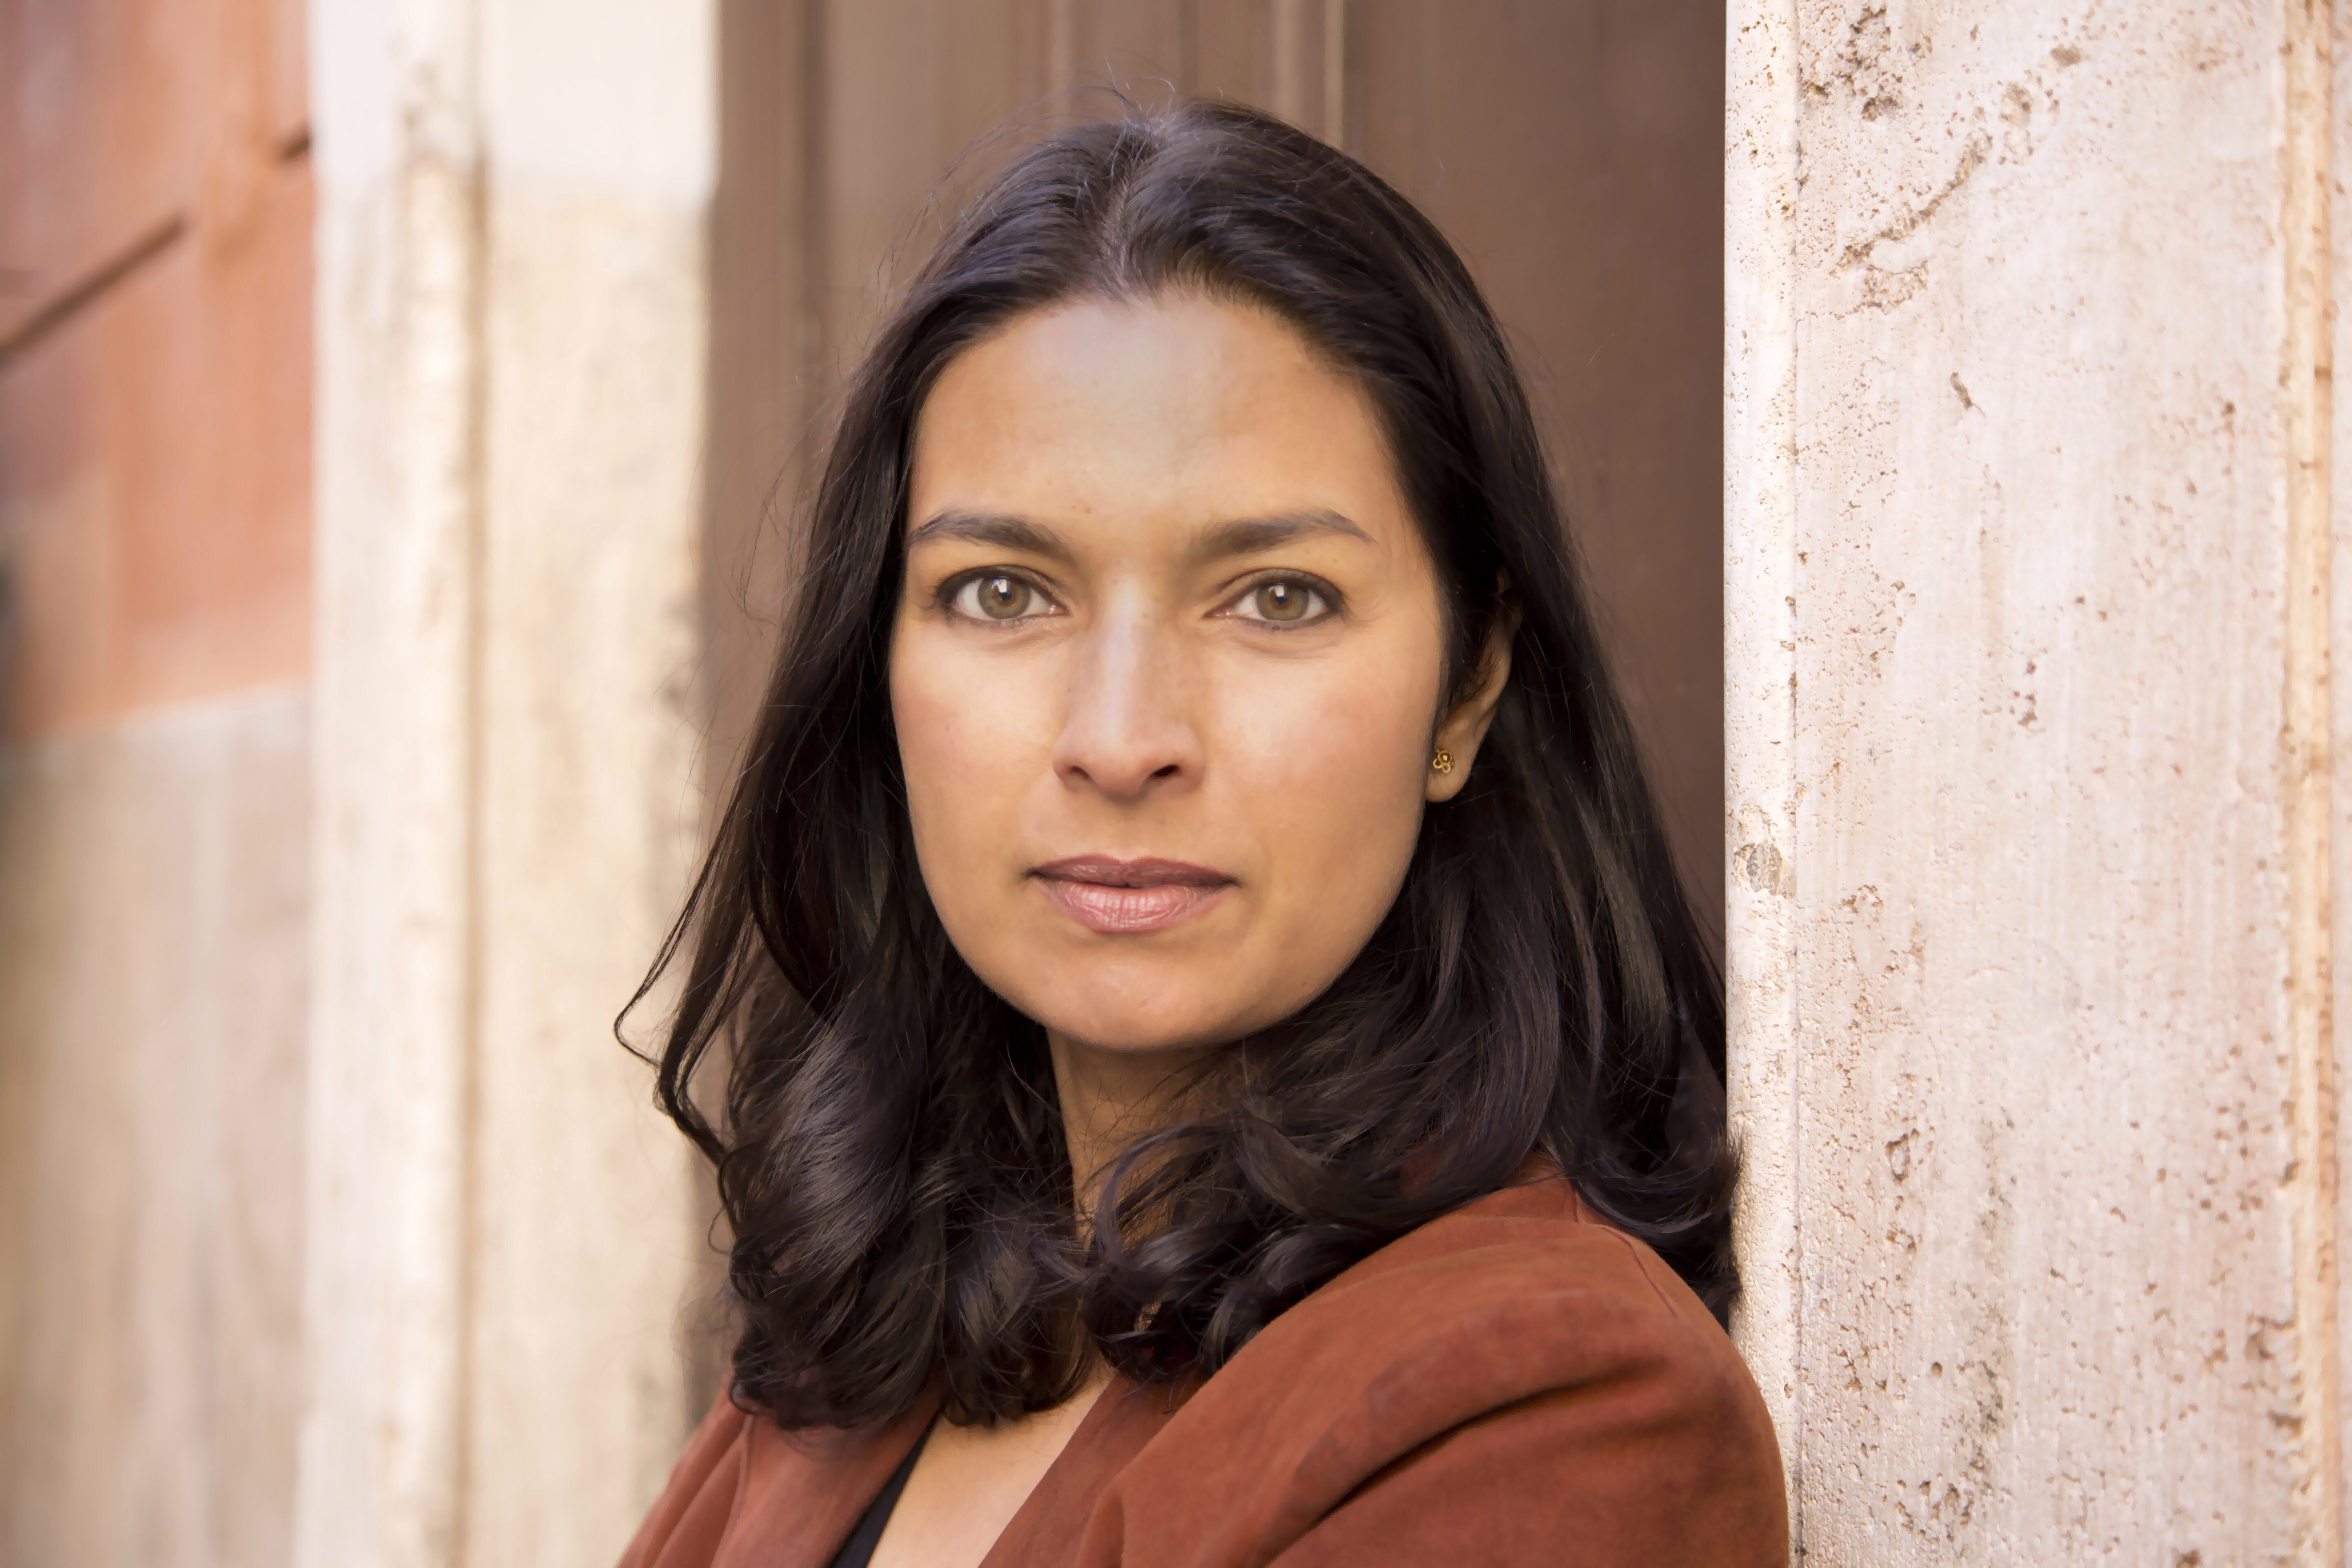 Author Jhumpa Lahiri, who is one of the star guests at this year’s Hong Kong International Literary Festival. Photo: Liana Miuccio